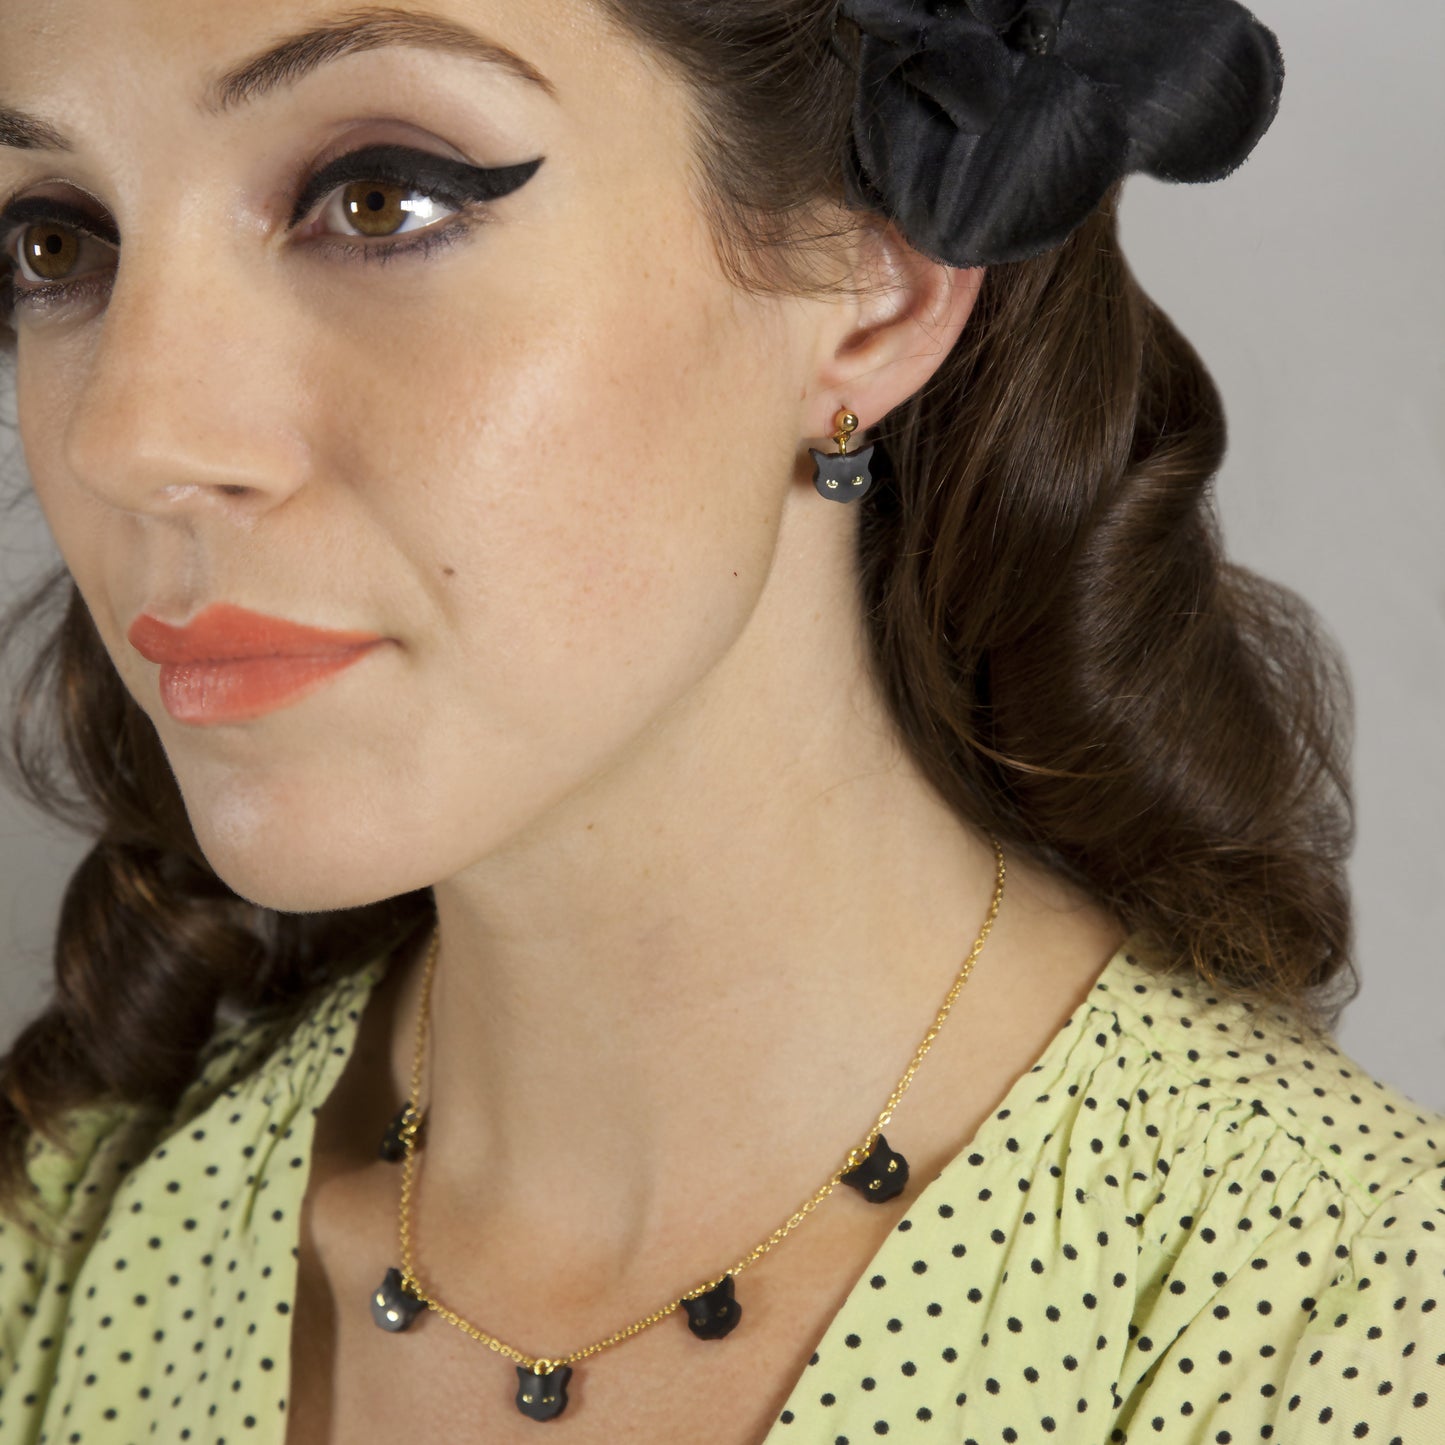 model wearing black leather cat face charm necklace & matching drop stud earrings.